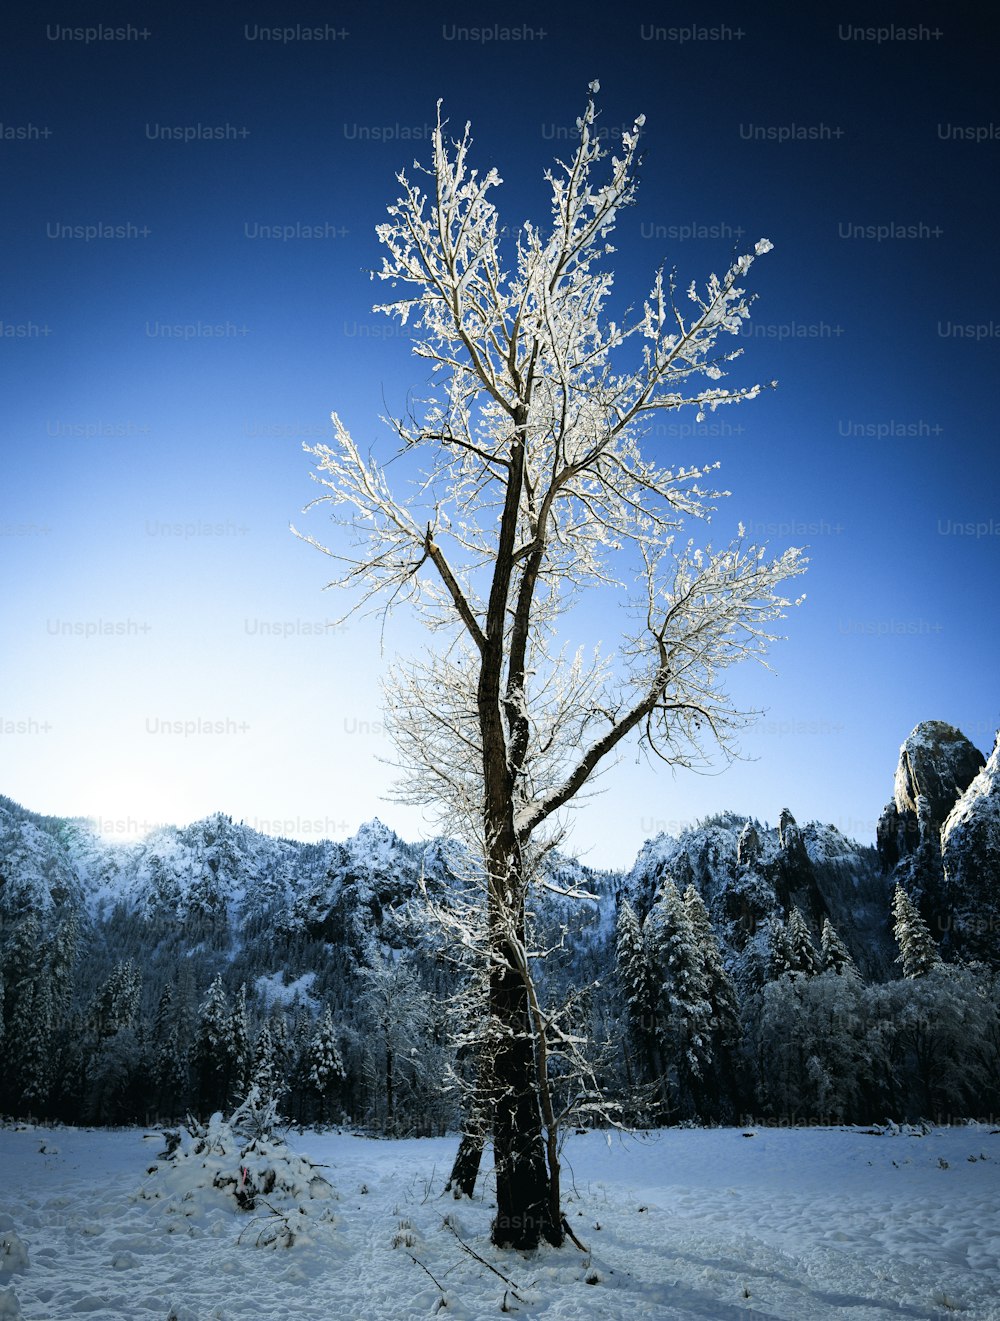 a lone tree in a snowy field with mountains in the background